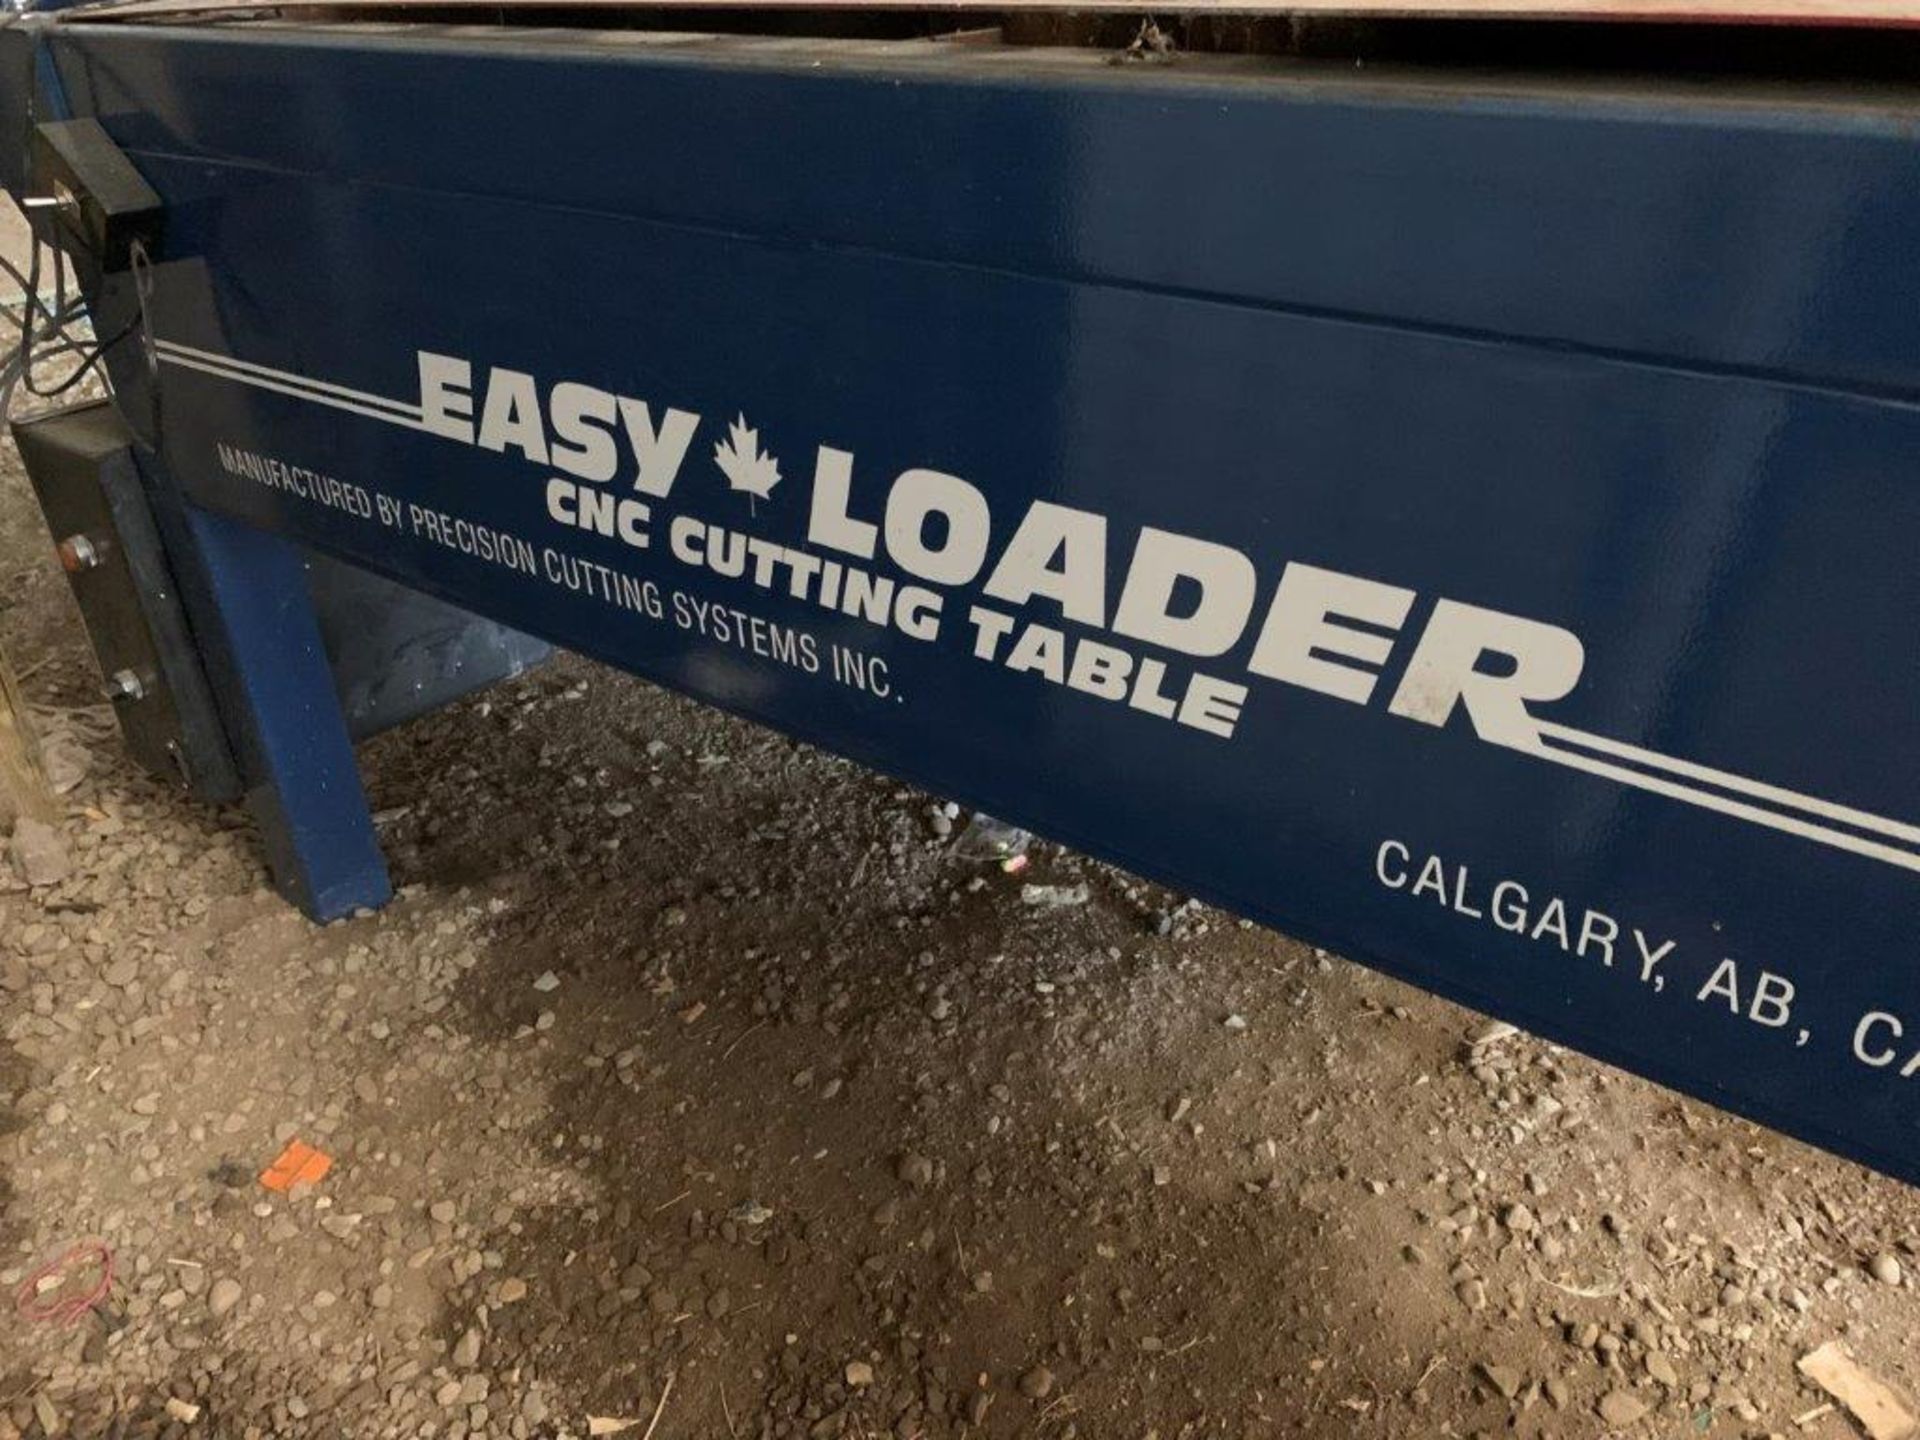 EASY LOADER CNC PLASMA CUTTING TABLE 6FT X 9.5 FT, MODEL22444, S/N 48087 - Image 4 of 9